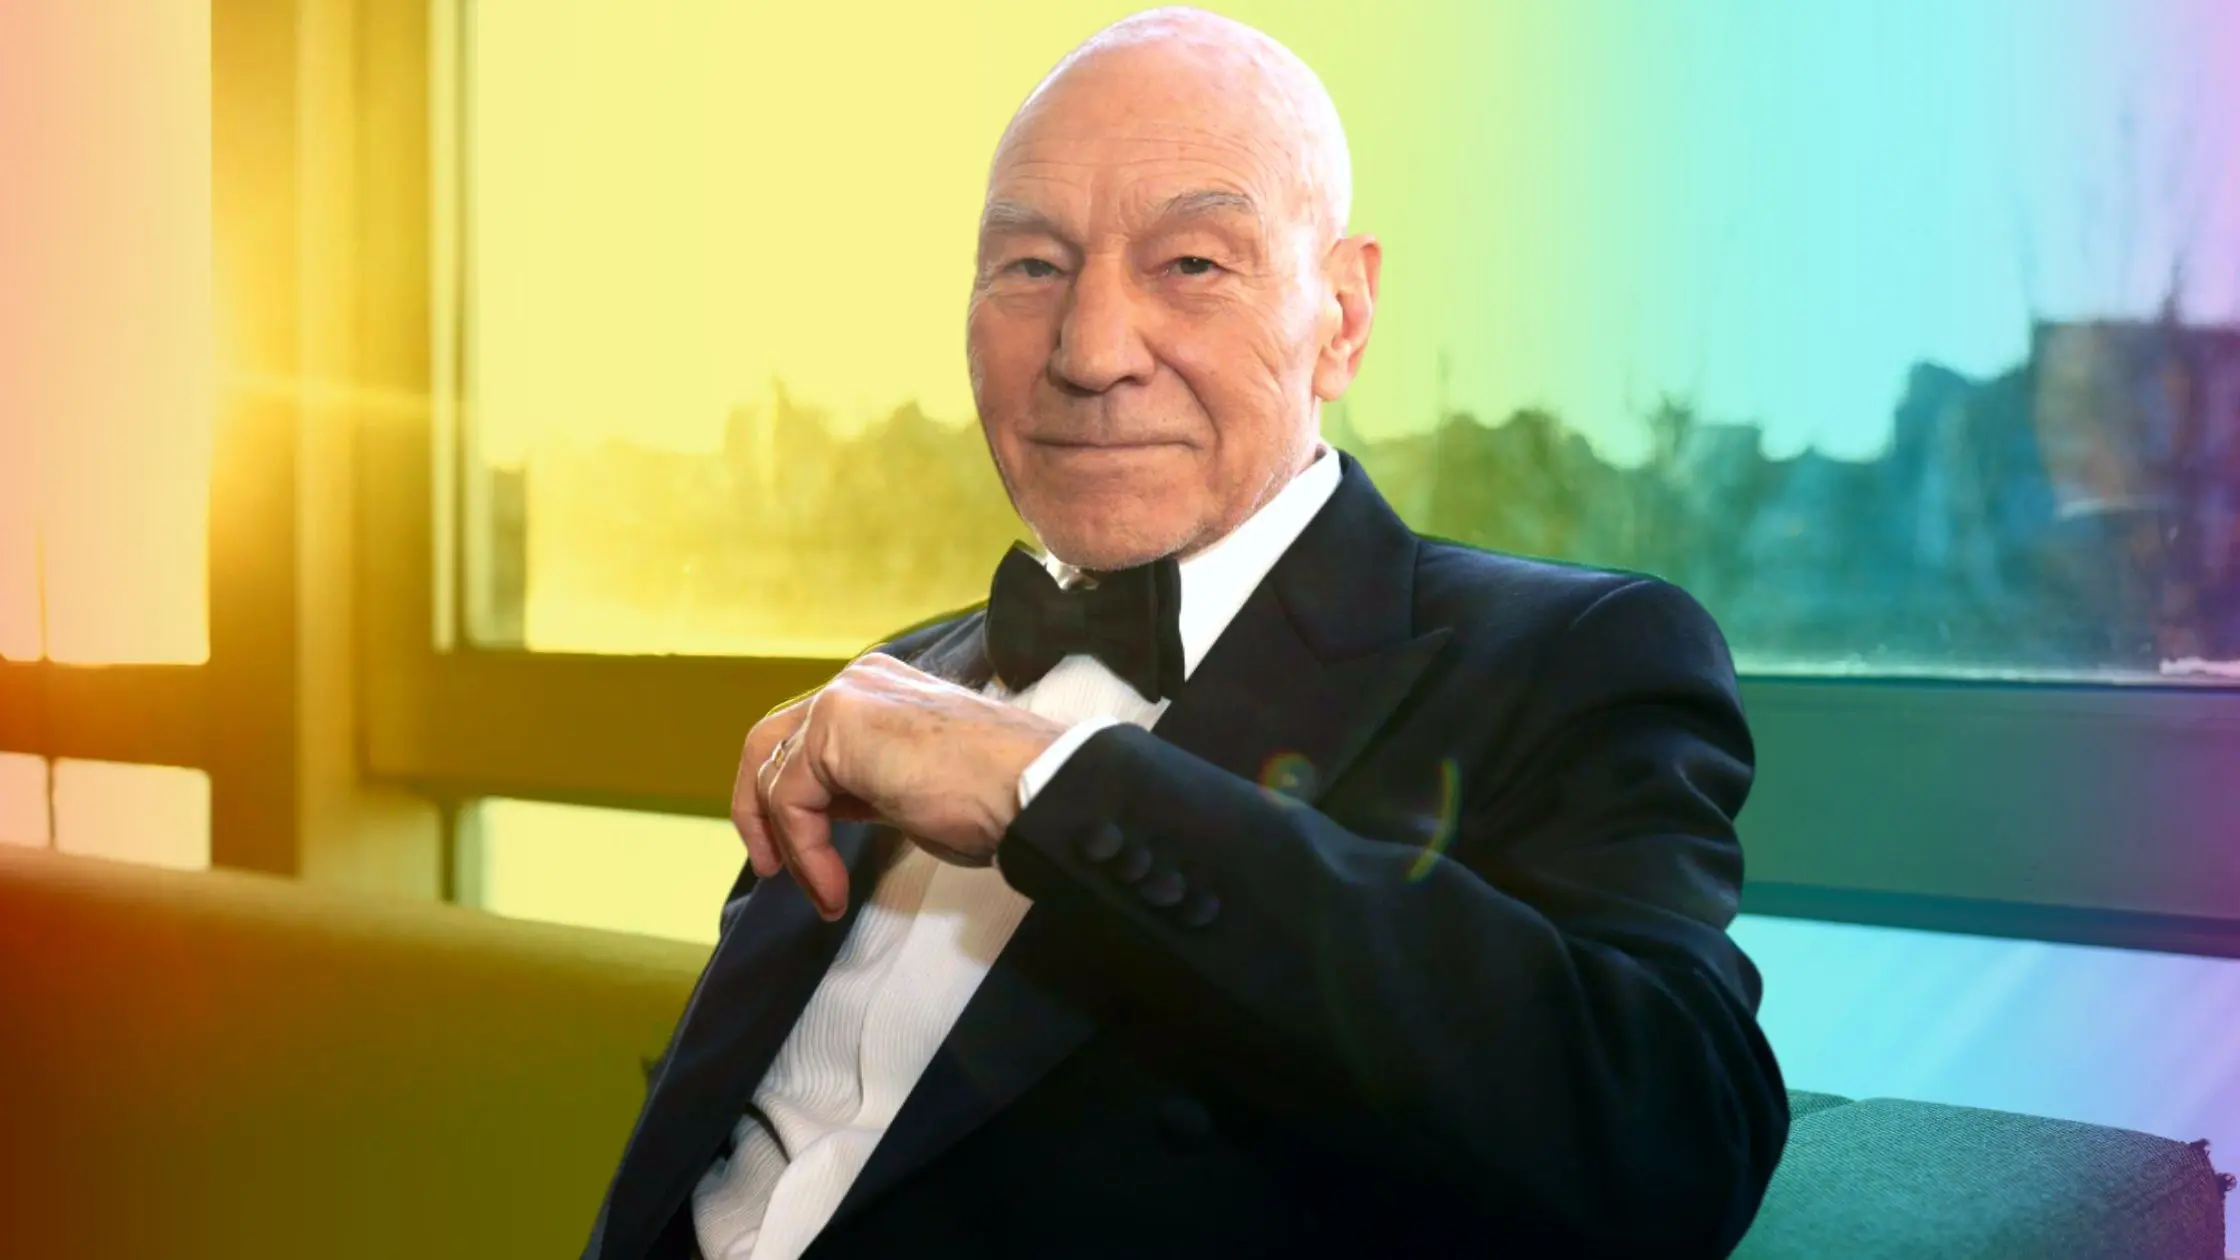 Is Patrick Stewart Gay Did He Respond To The Gay Rumors